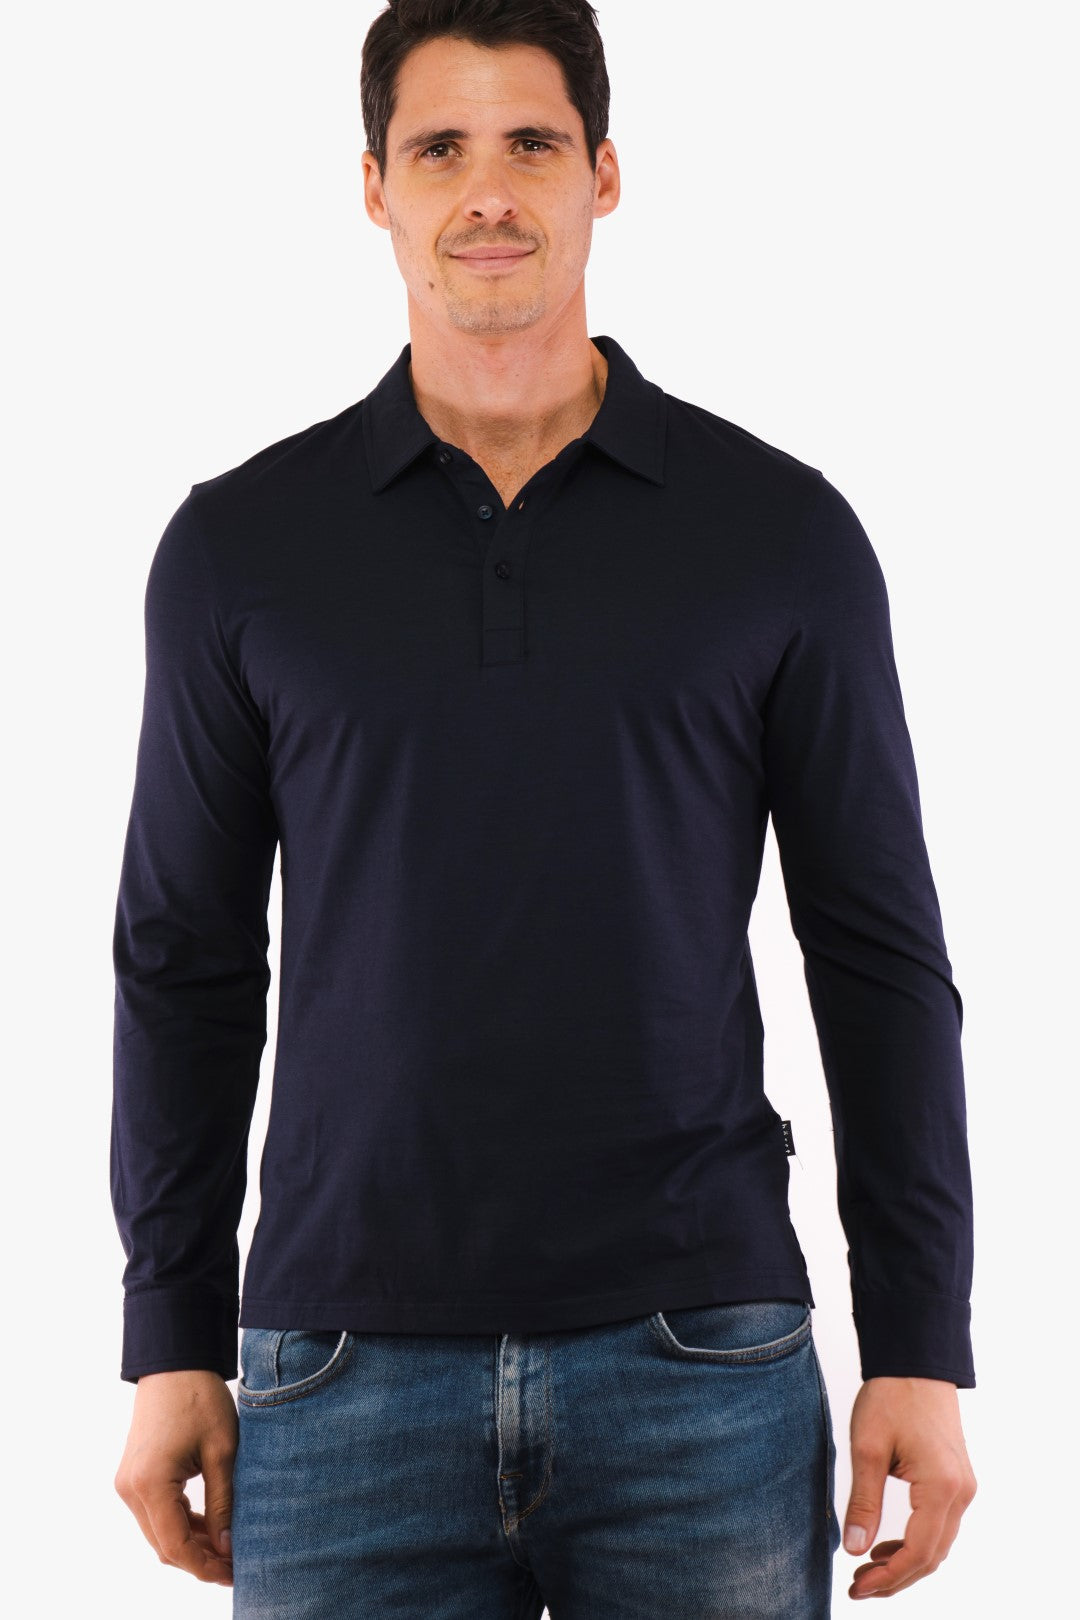 Hörst polo shirt in Navy color